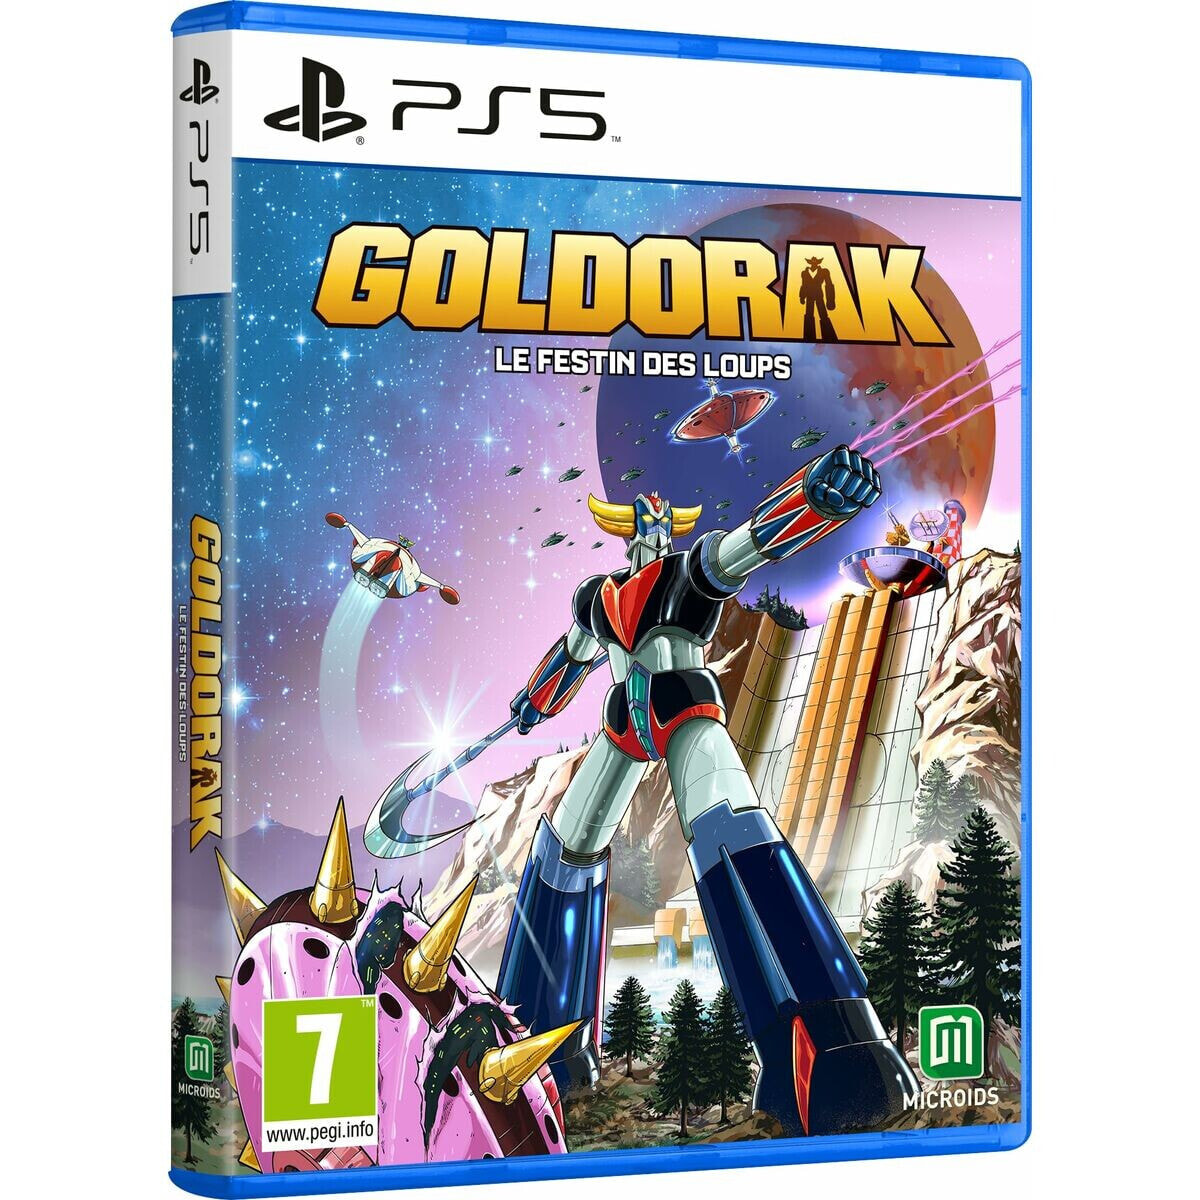 Видеоигры PlayStation 5 Microids Goldorak Grendizer: The Feast of the Wolves - Standard Edition (FR)